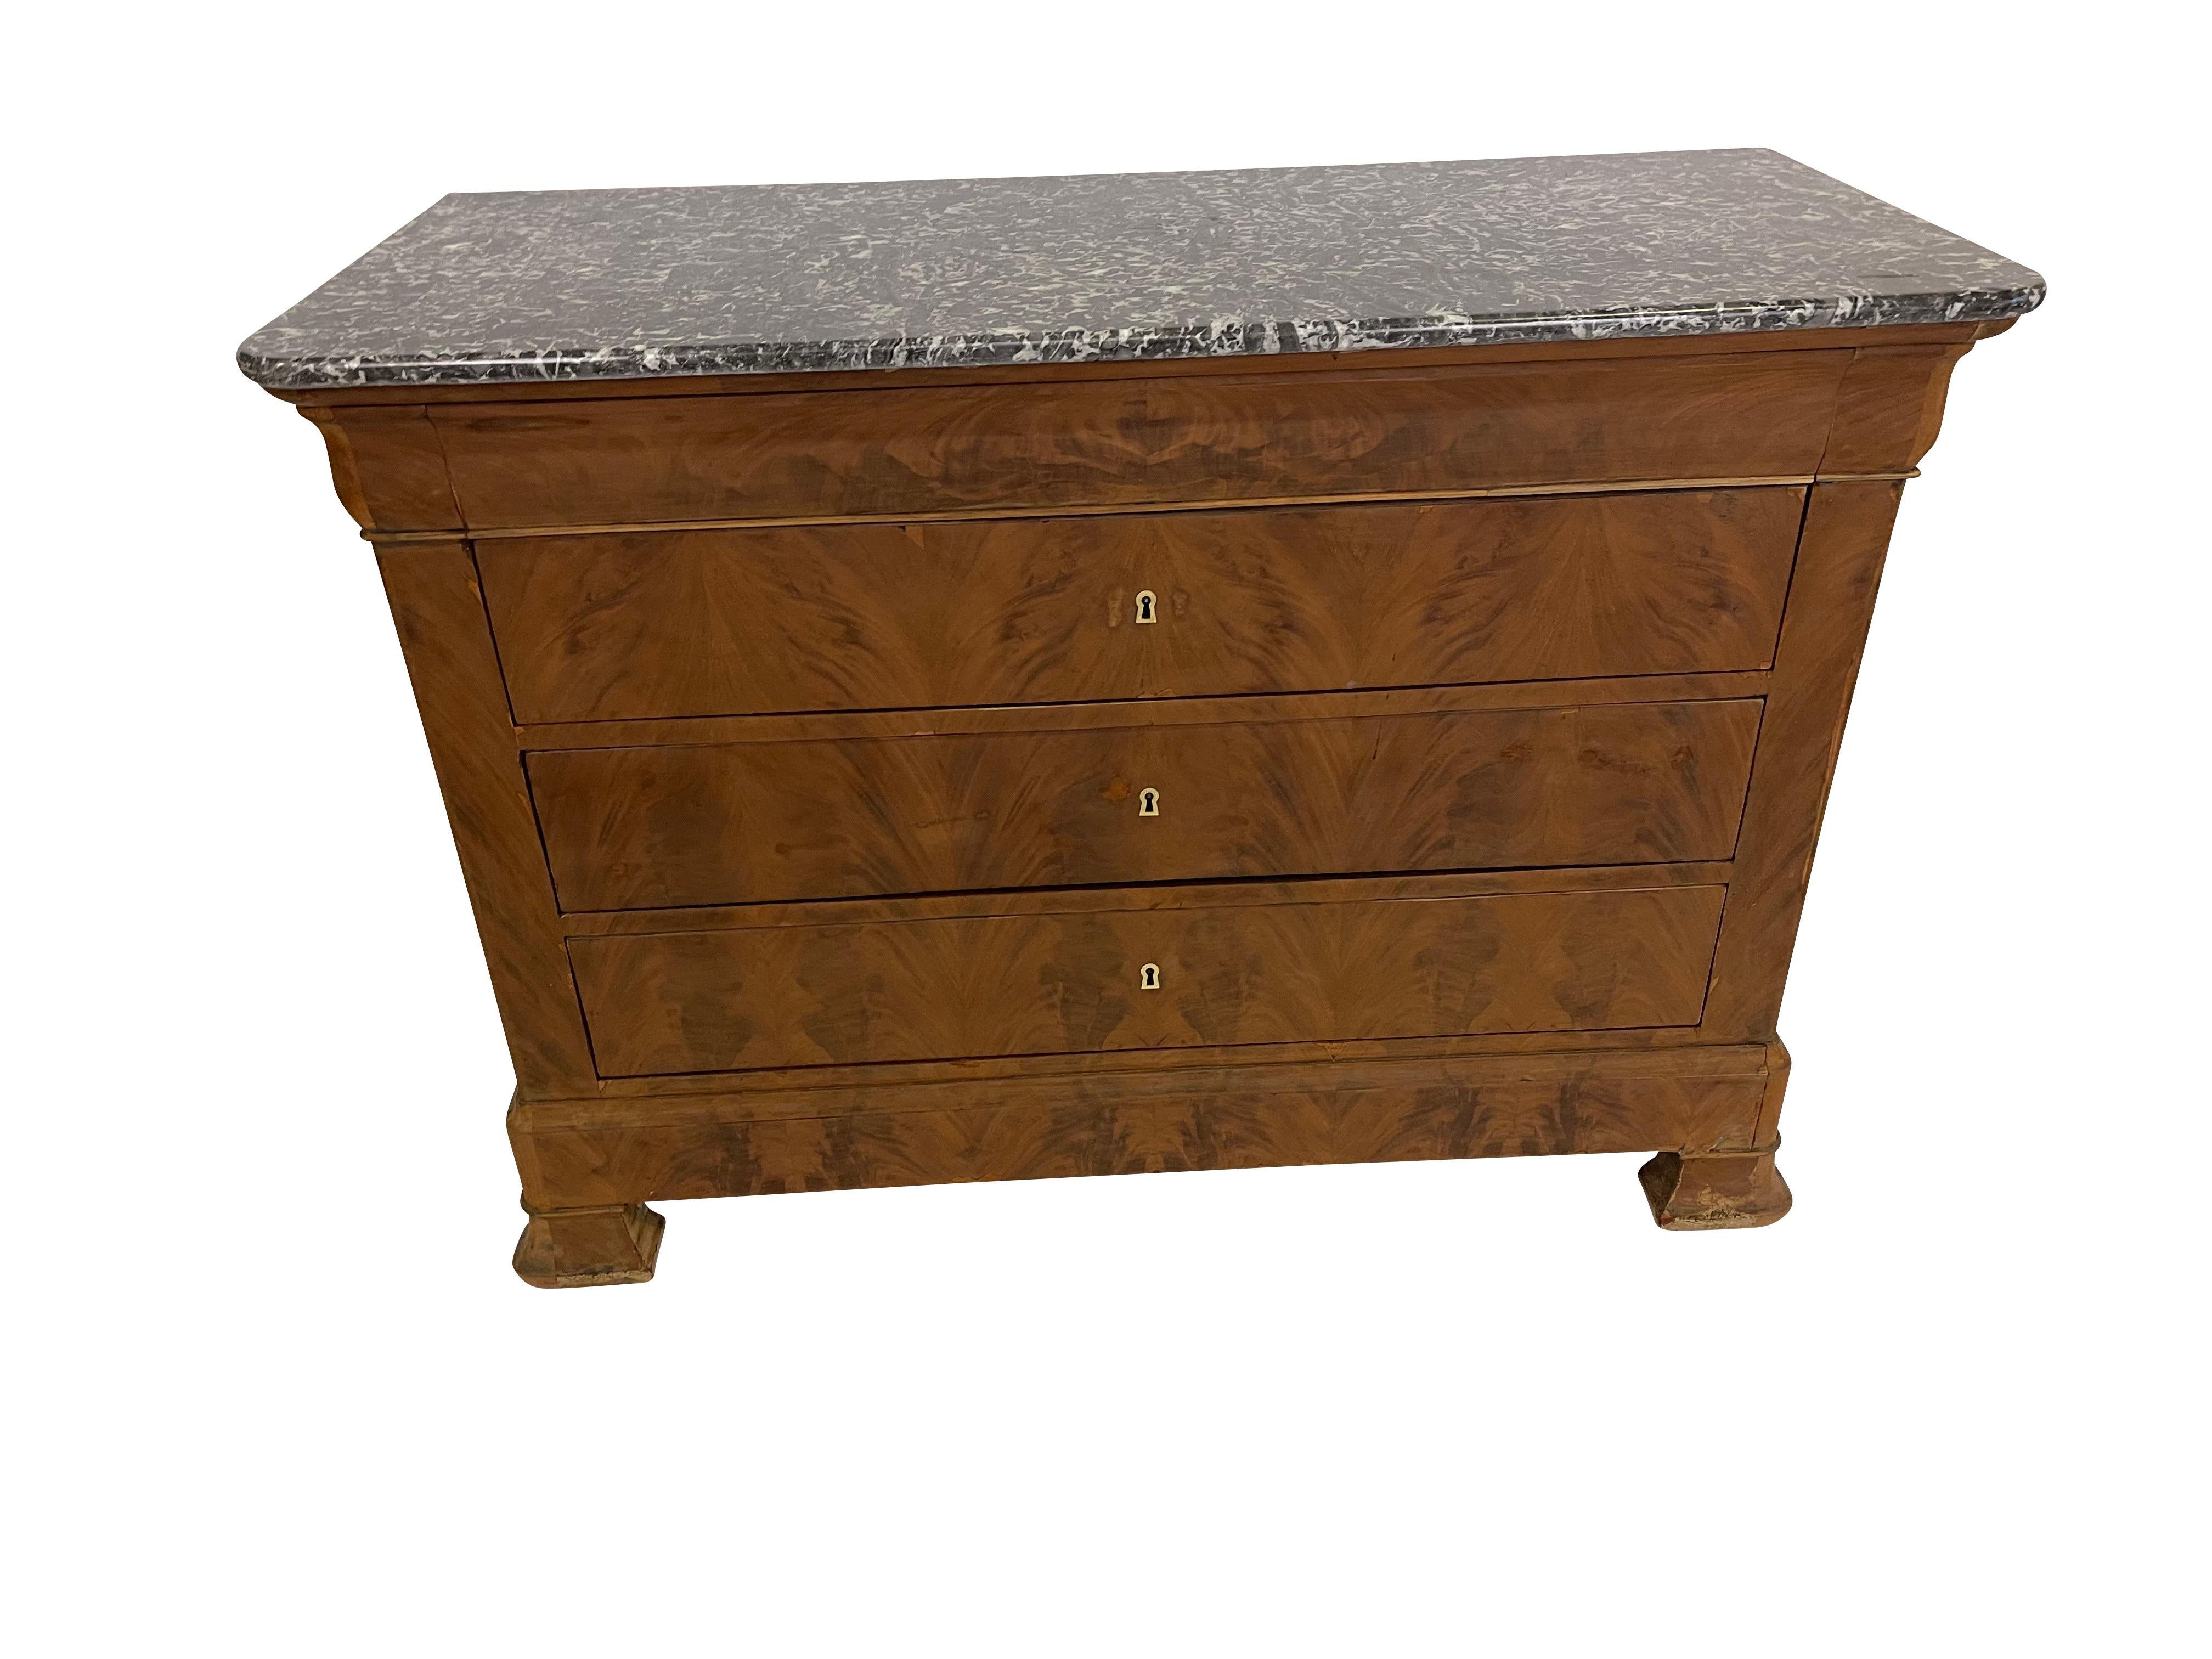 Imported from France, this 19th-century burled walnut marble top Louis Phillipe commode. The entire case is made up of wonderfully grained flame walnut that has been bleached to lighten the piece and bring out the beautiful grain of the burled